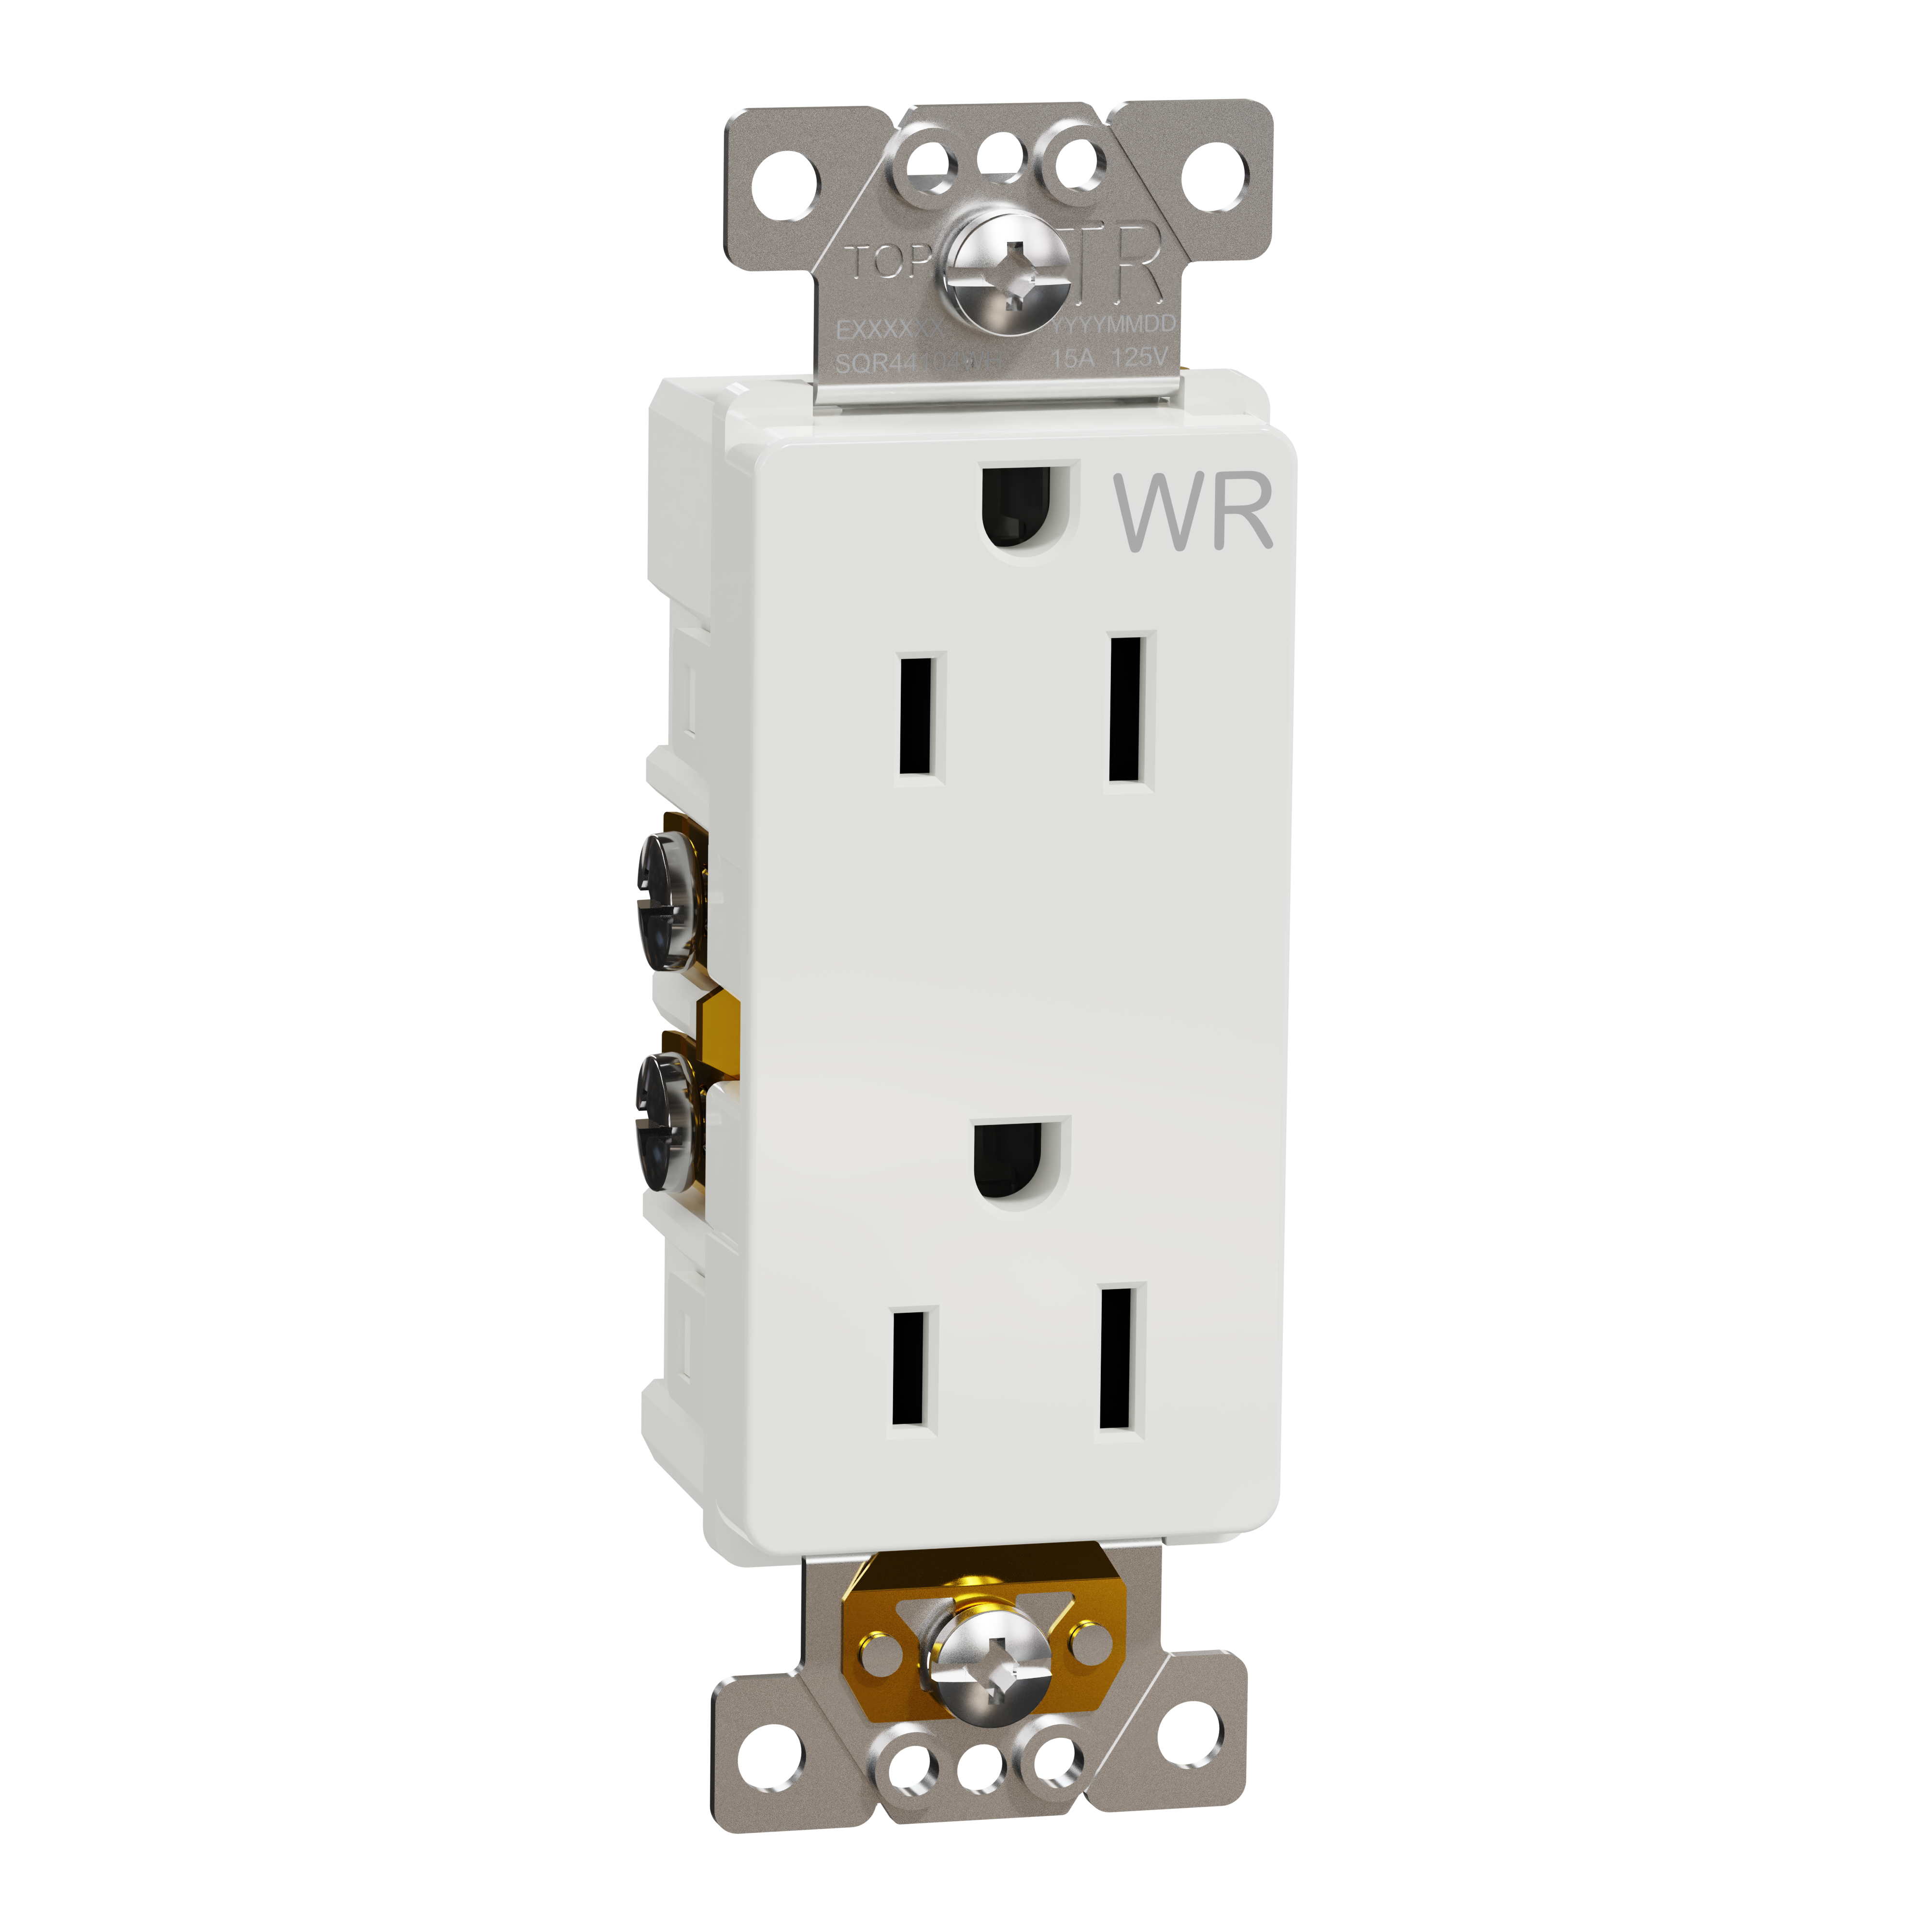 Socket-outlet, X Series, 15A, decorator, tamper resistant, weatherproof, residential, white, matte finish